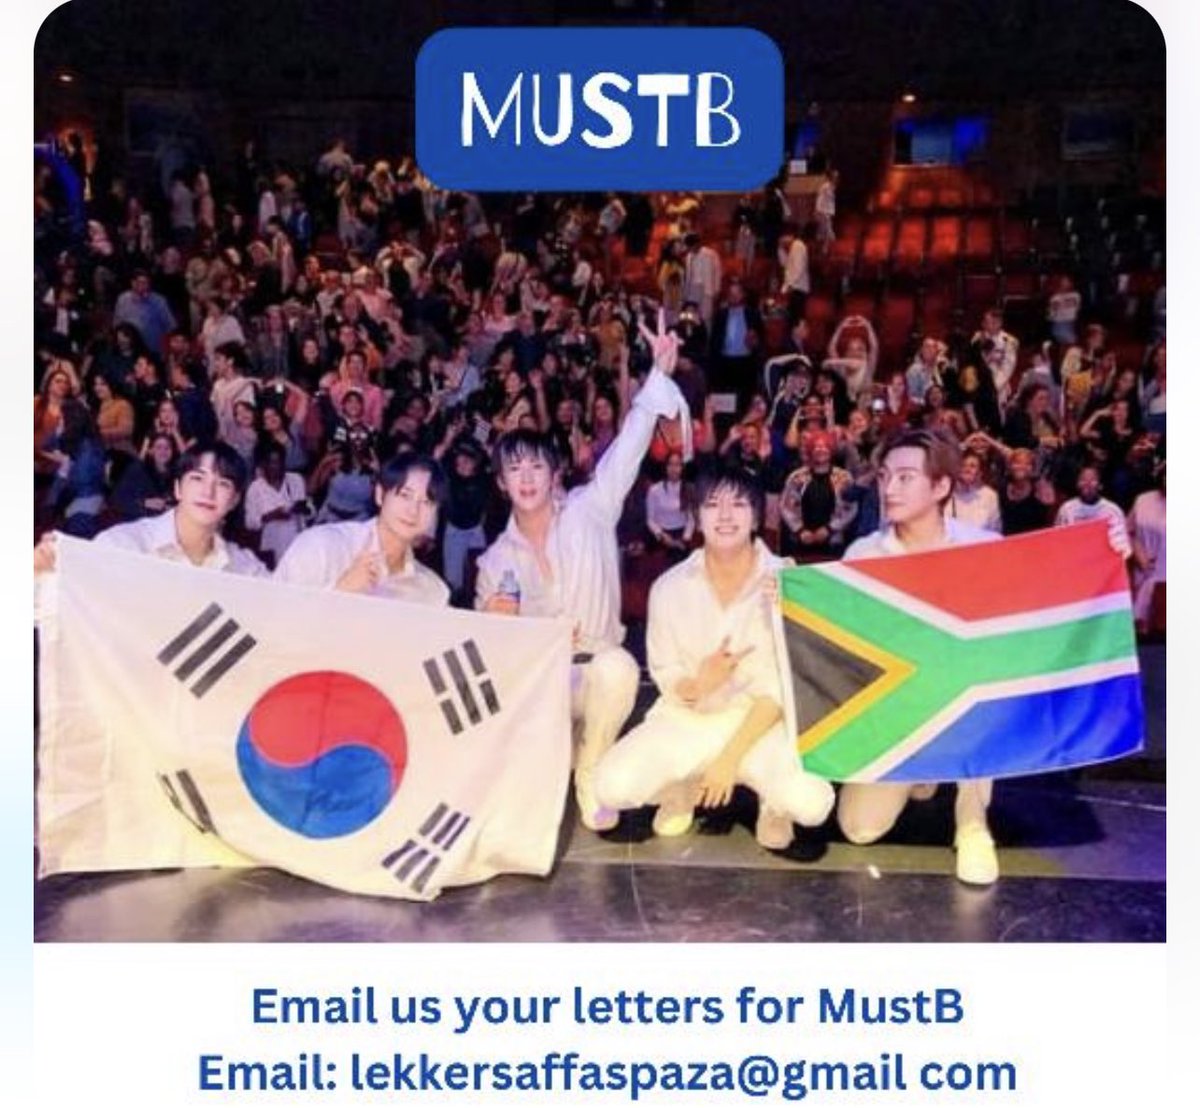 Muffins…want to send a personal message to MustB? Here’s your opportunity 💌

@lekkersaffaspaza will be interviewing MustB and have offered to take along you letters/messages for MustB🥰

Send your emails to lekkersaffaspaza@gmail com.📧

#MustB #LettersOfLove #LekkerSaffaSpaza